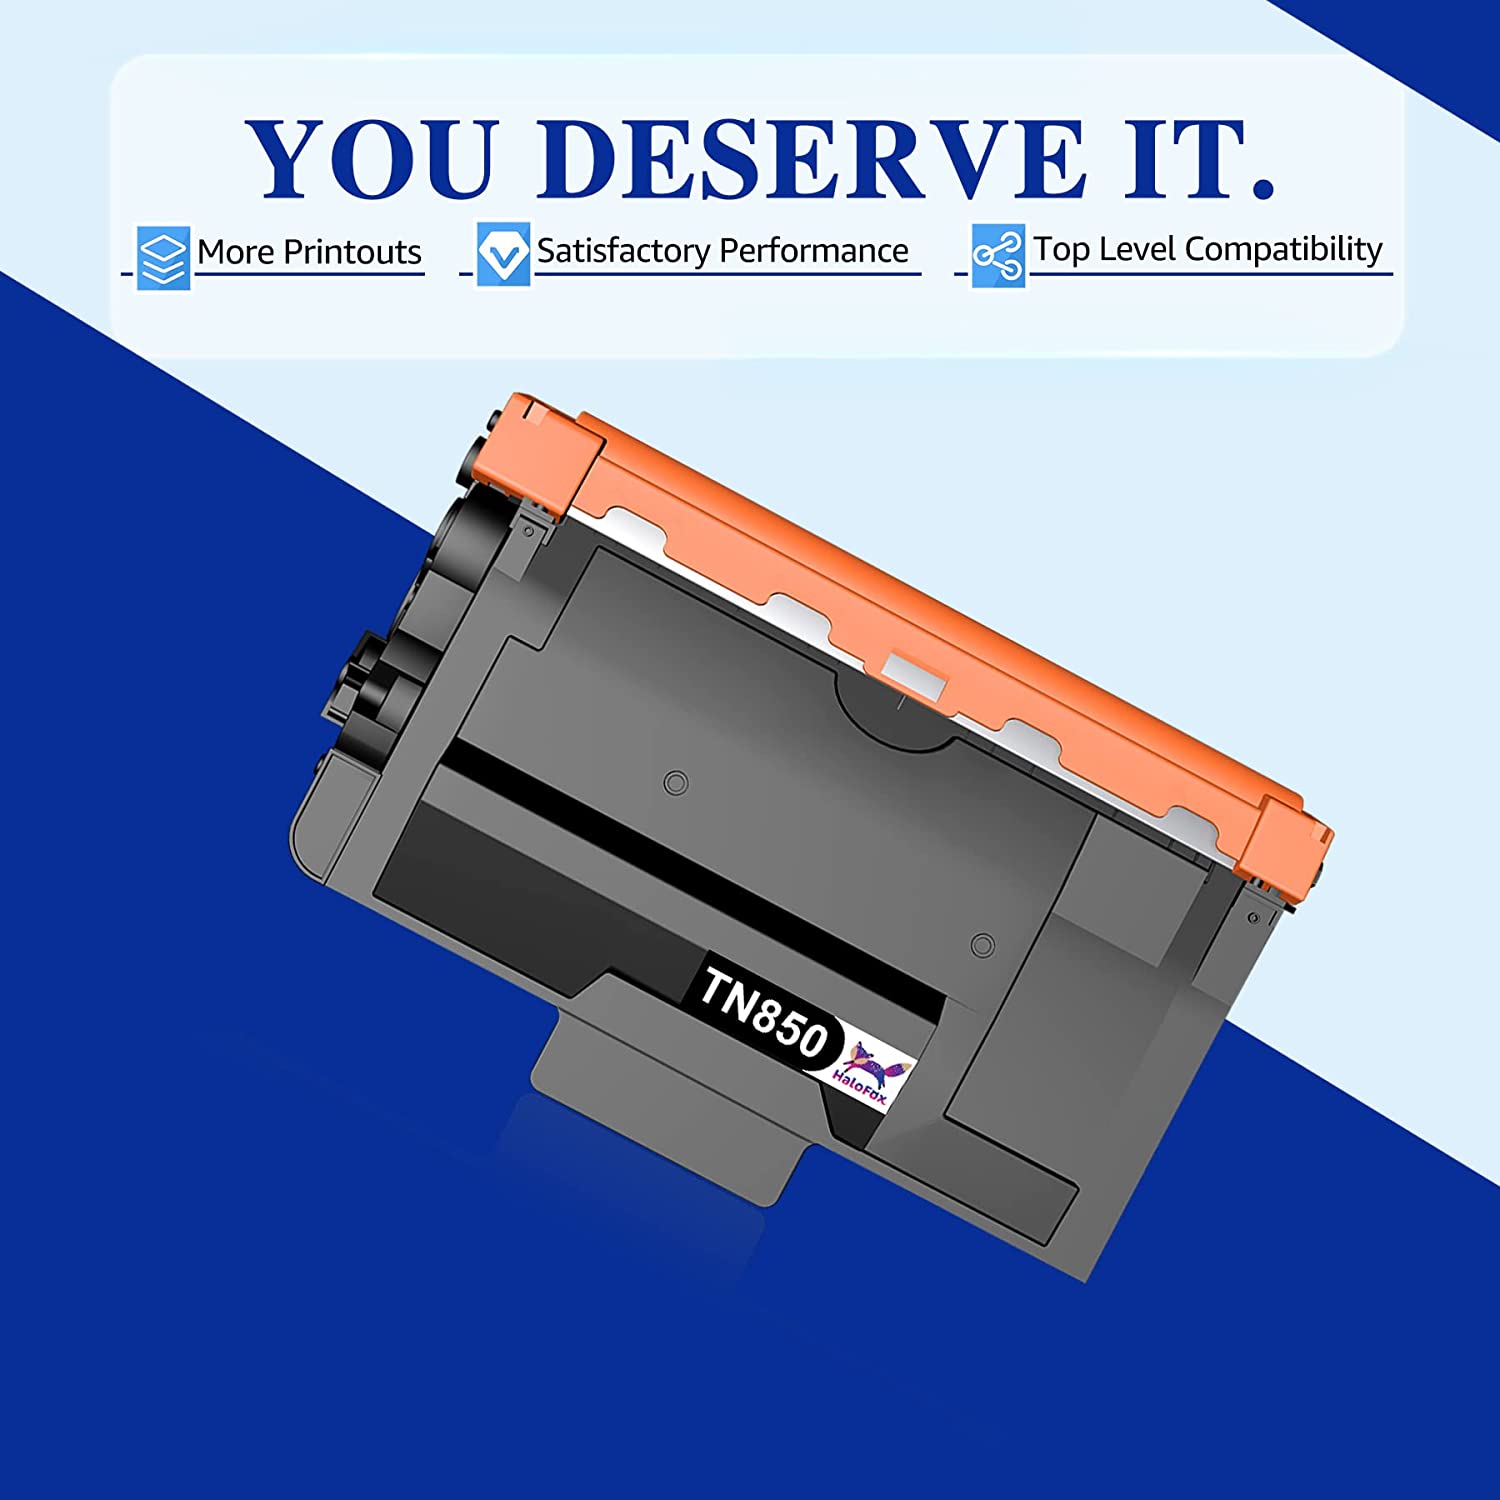 Brother TN 850 High Yield Black Toner Cartridges Pack Of 2